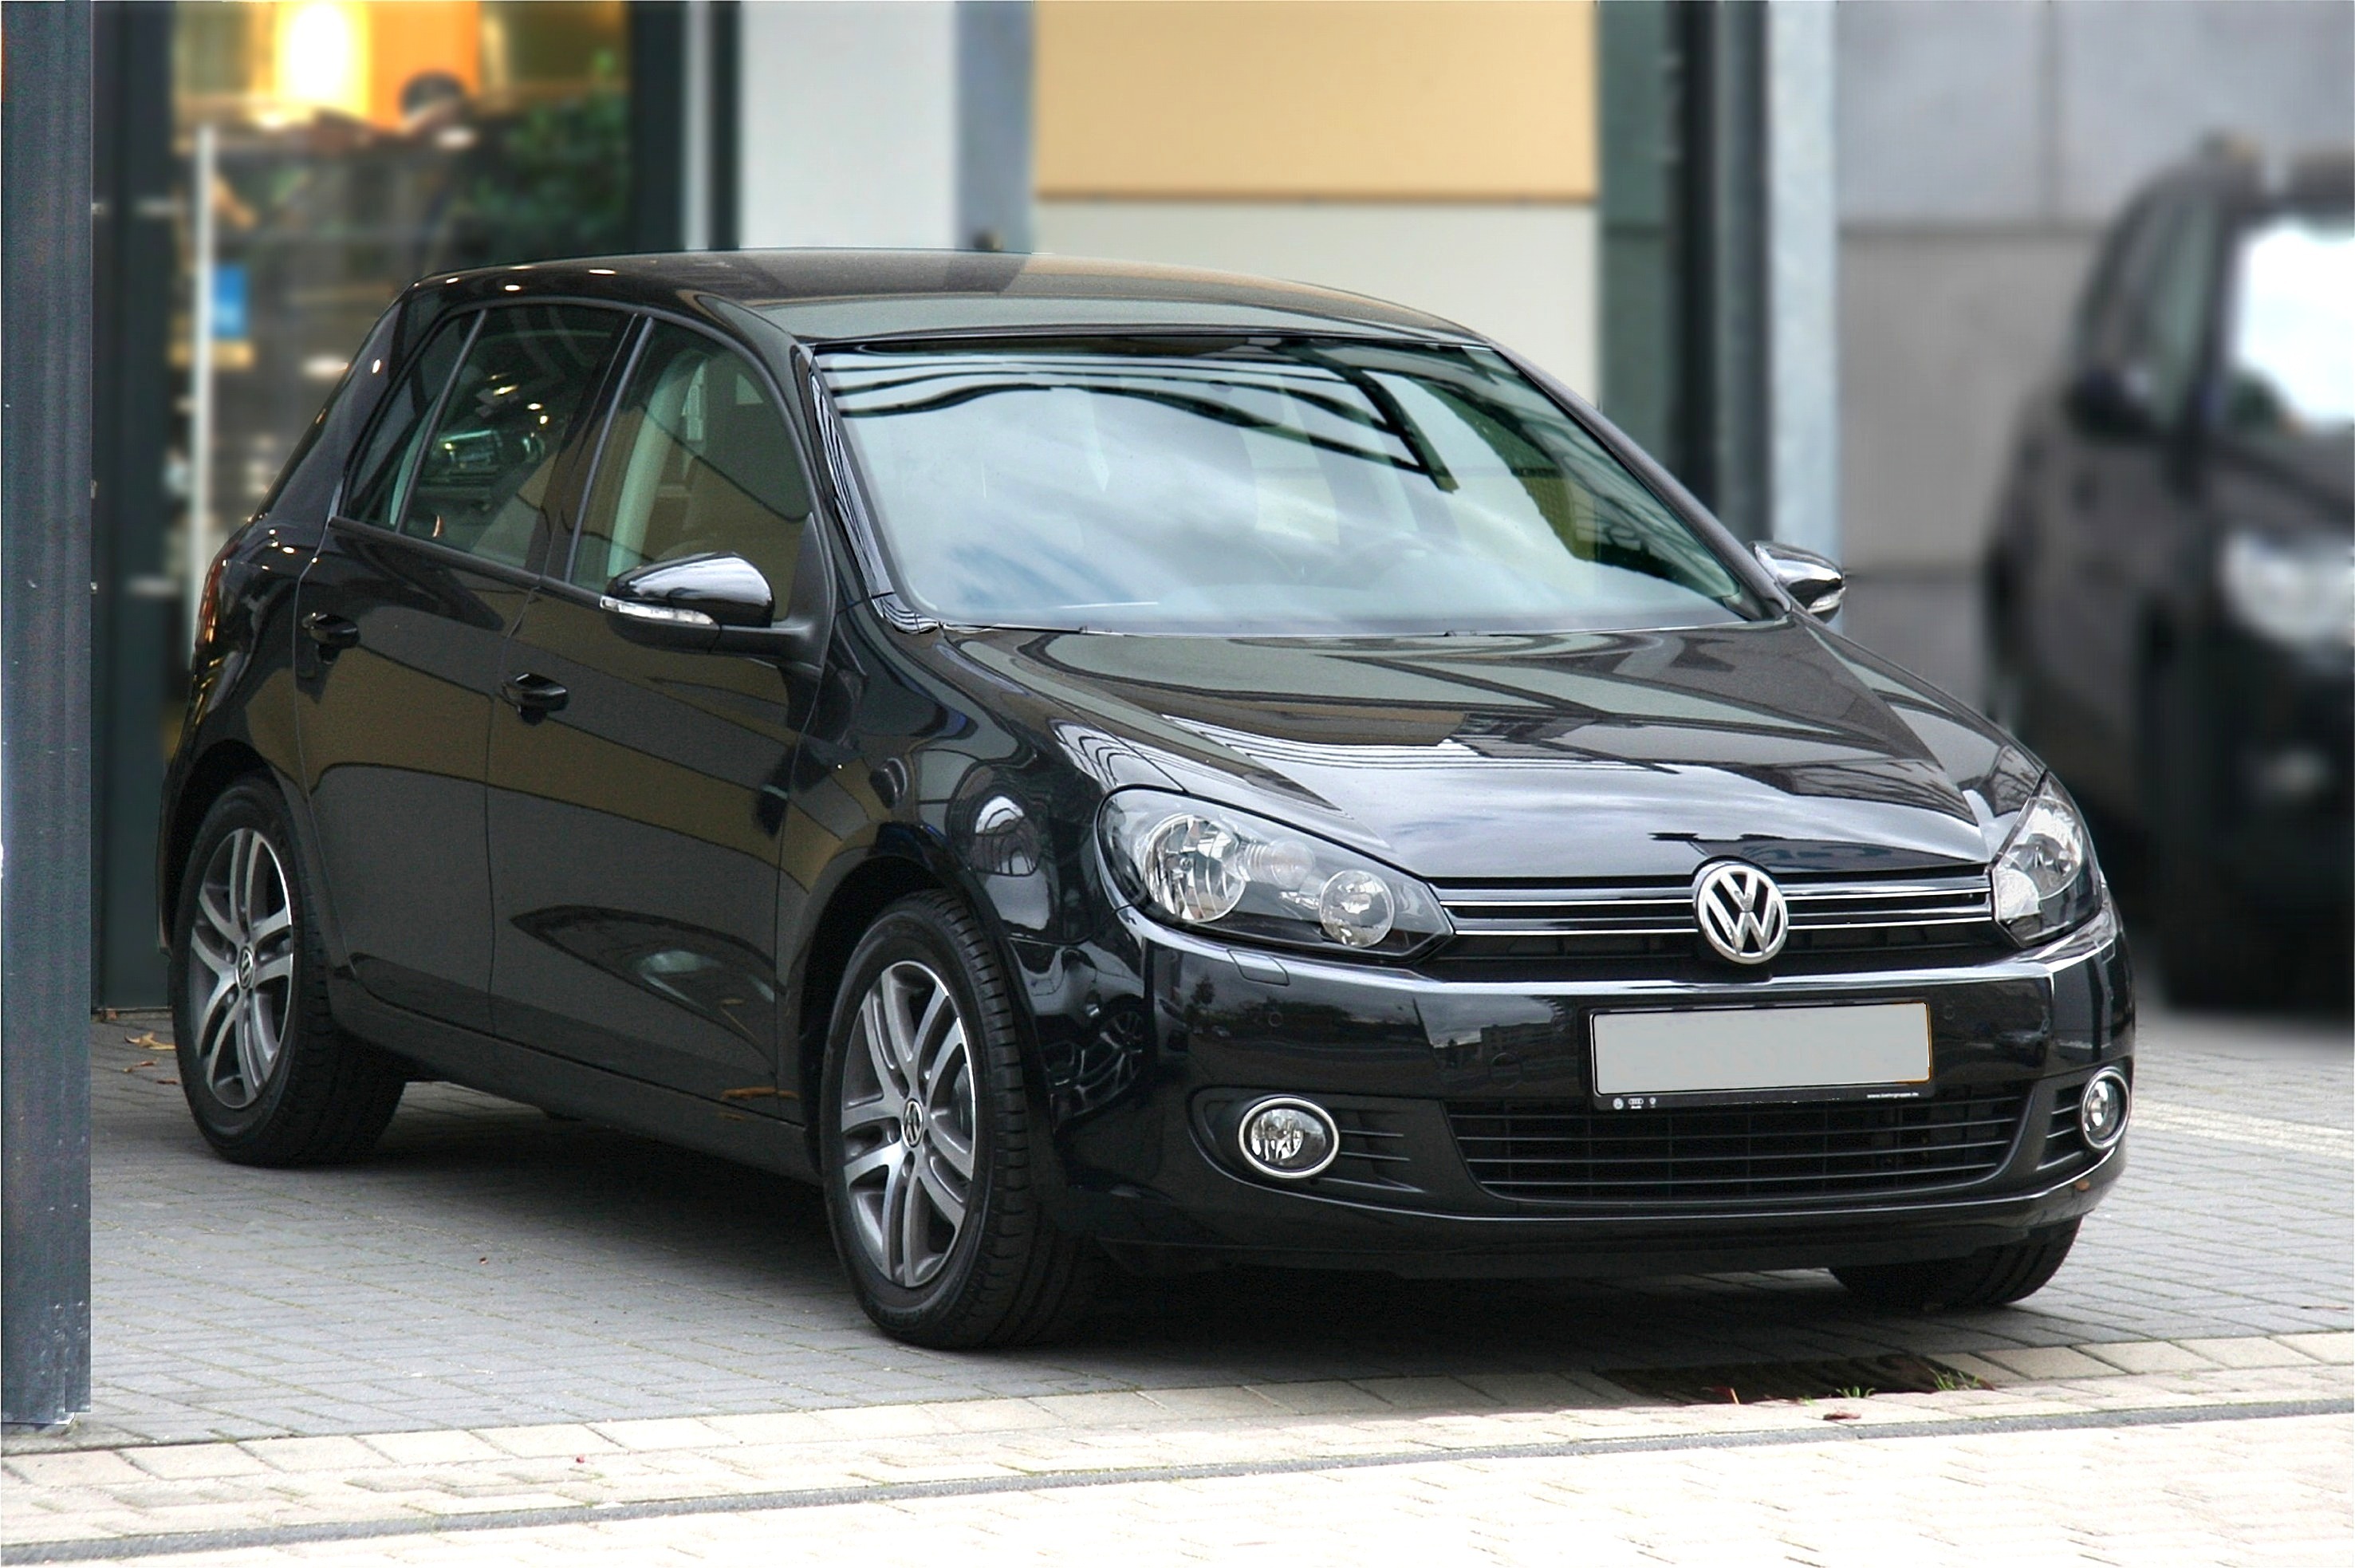 VW Golf 6 technical details, history, photos on Better